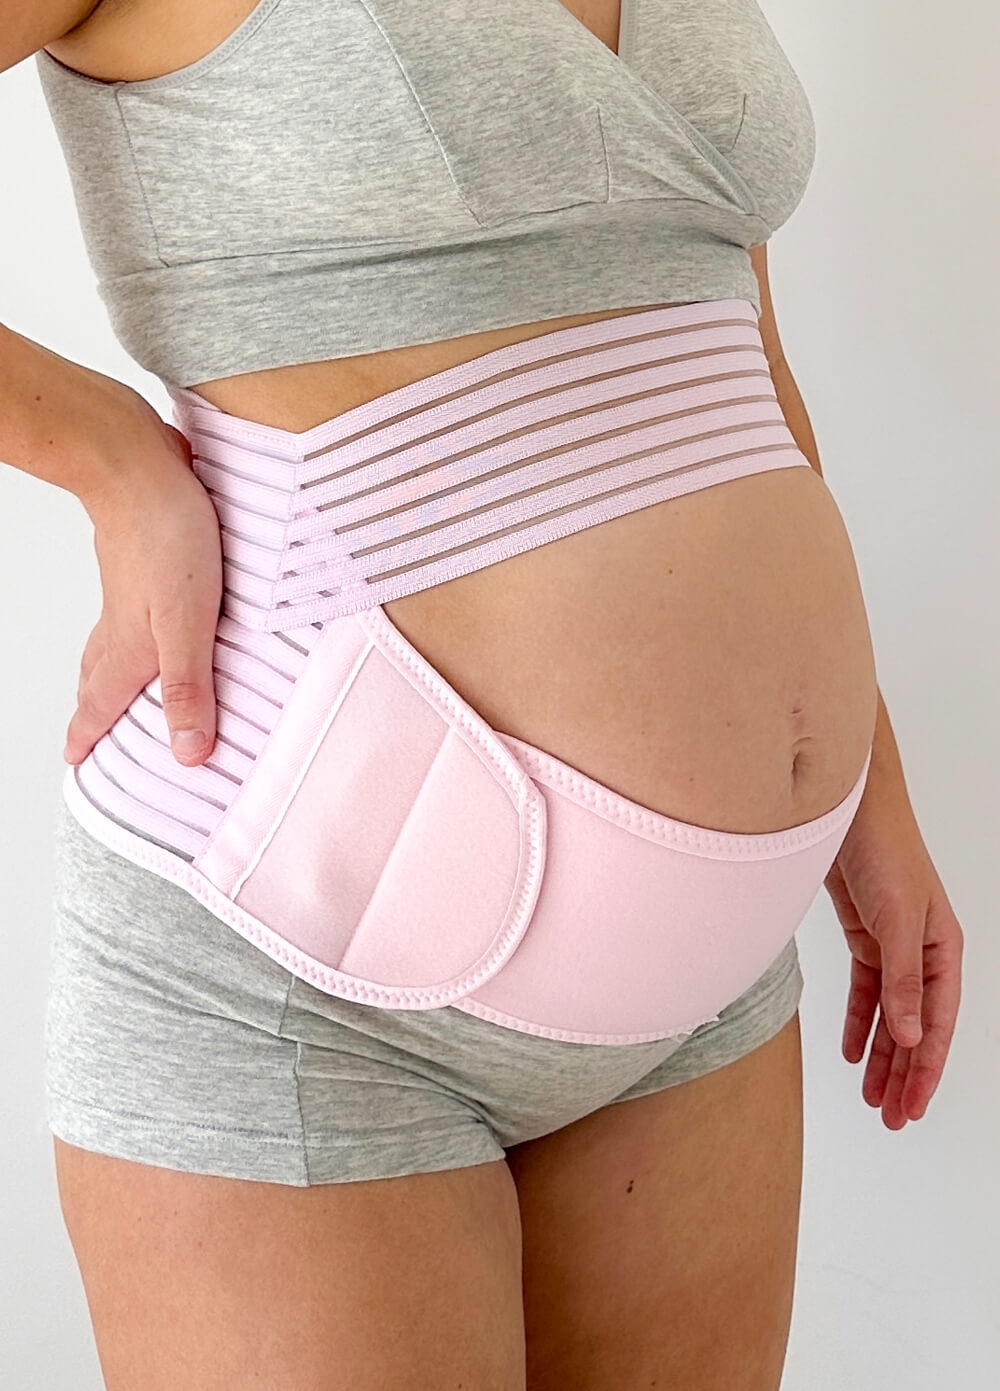 How to choose the best postpartum belly band in Australia? – Belly